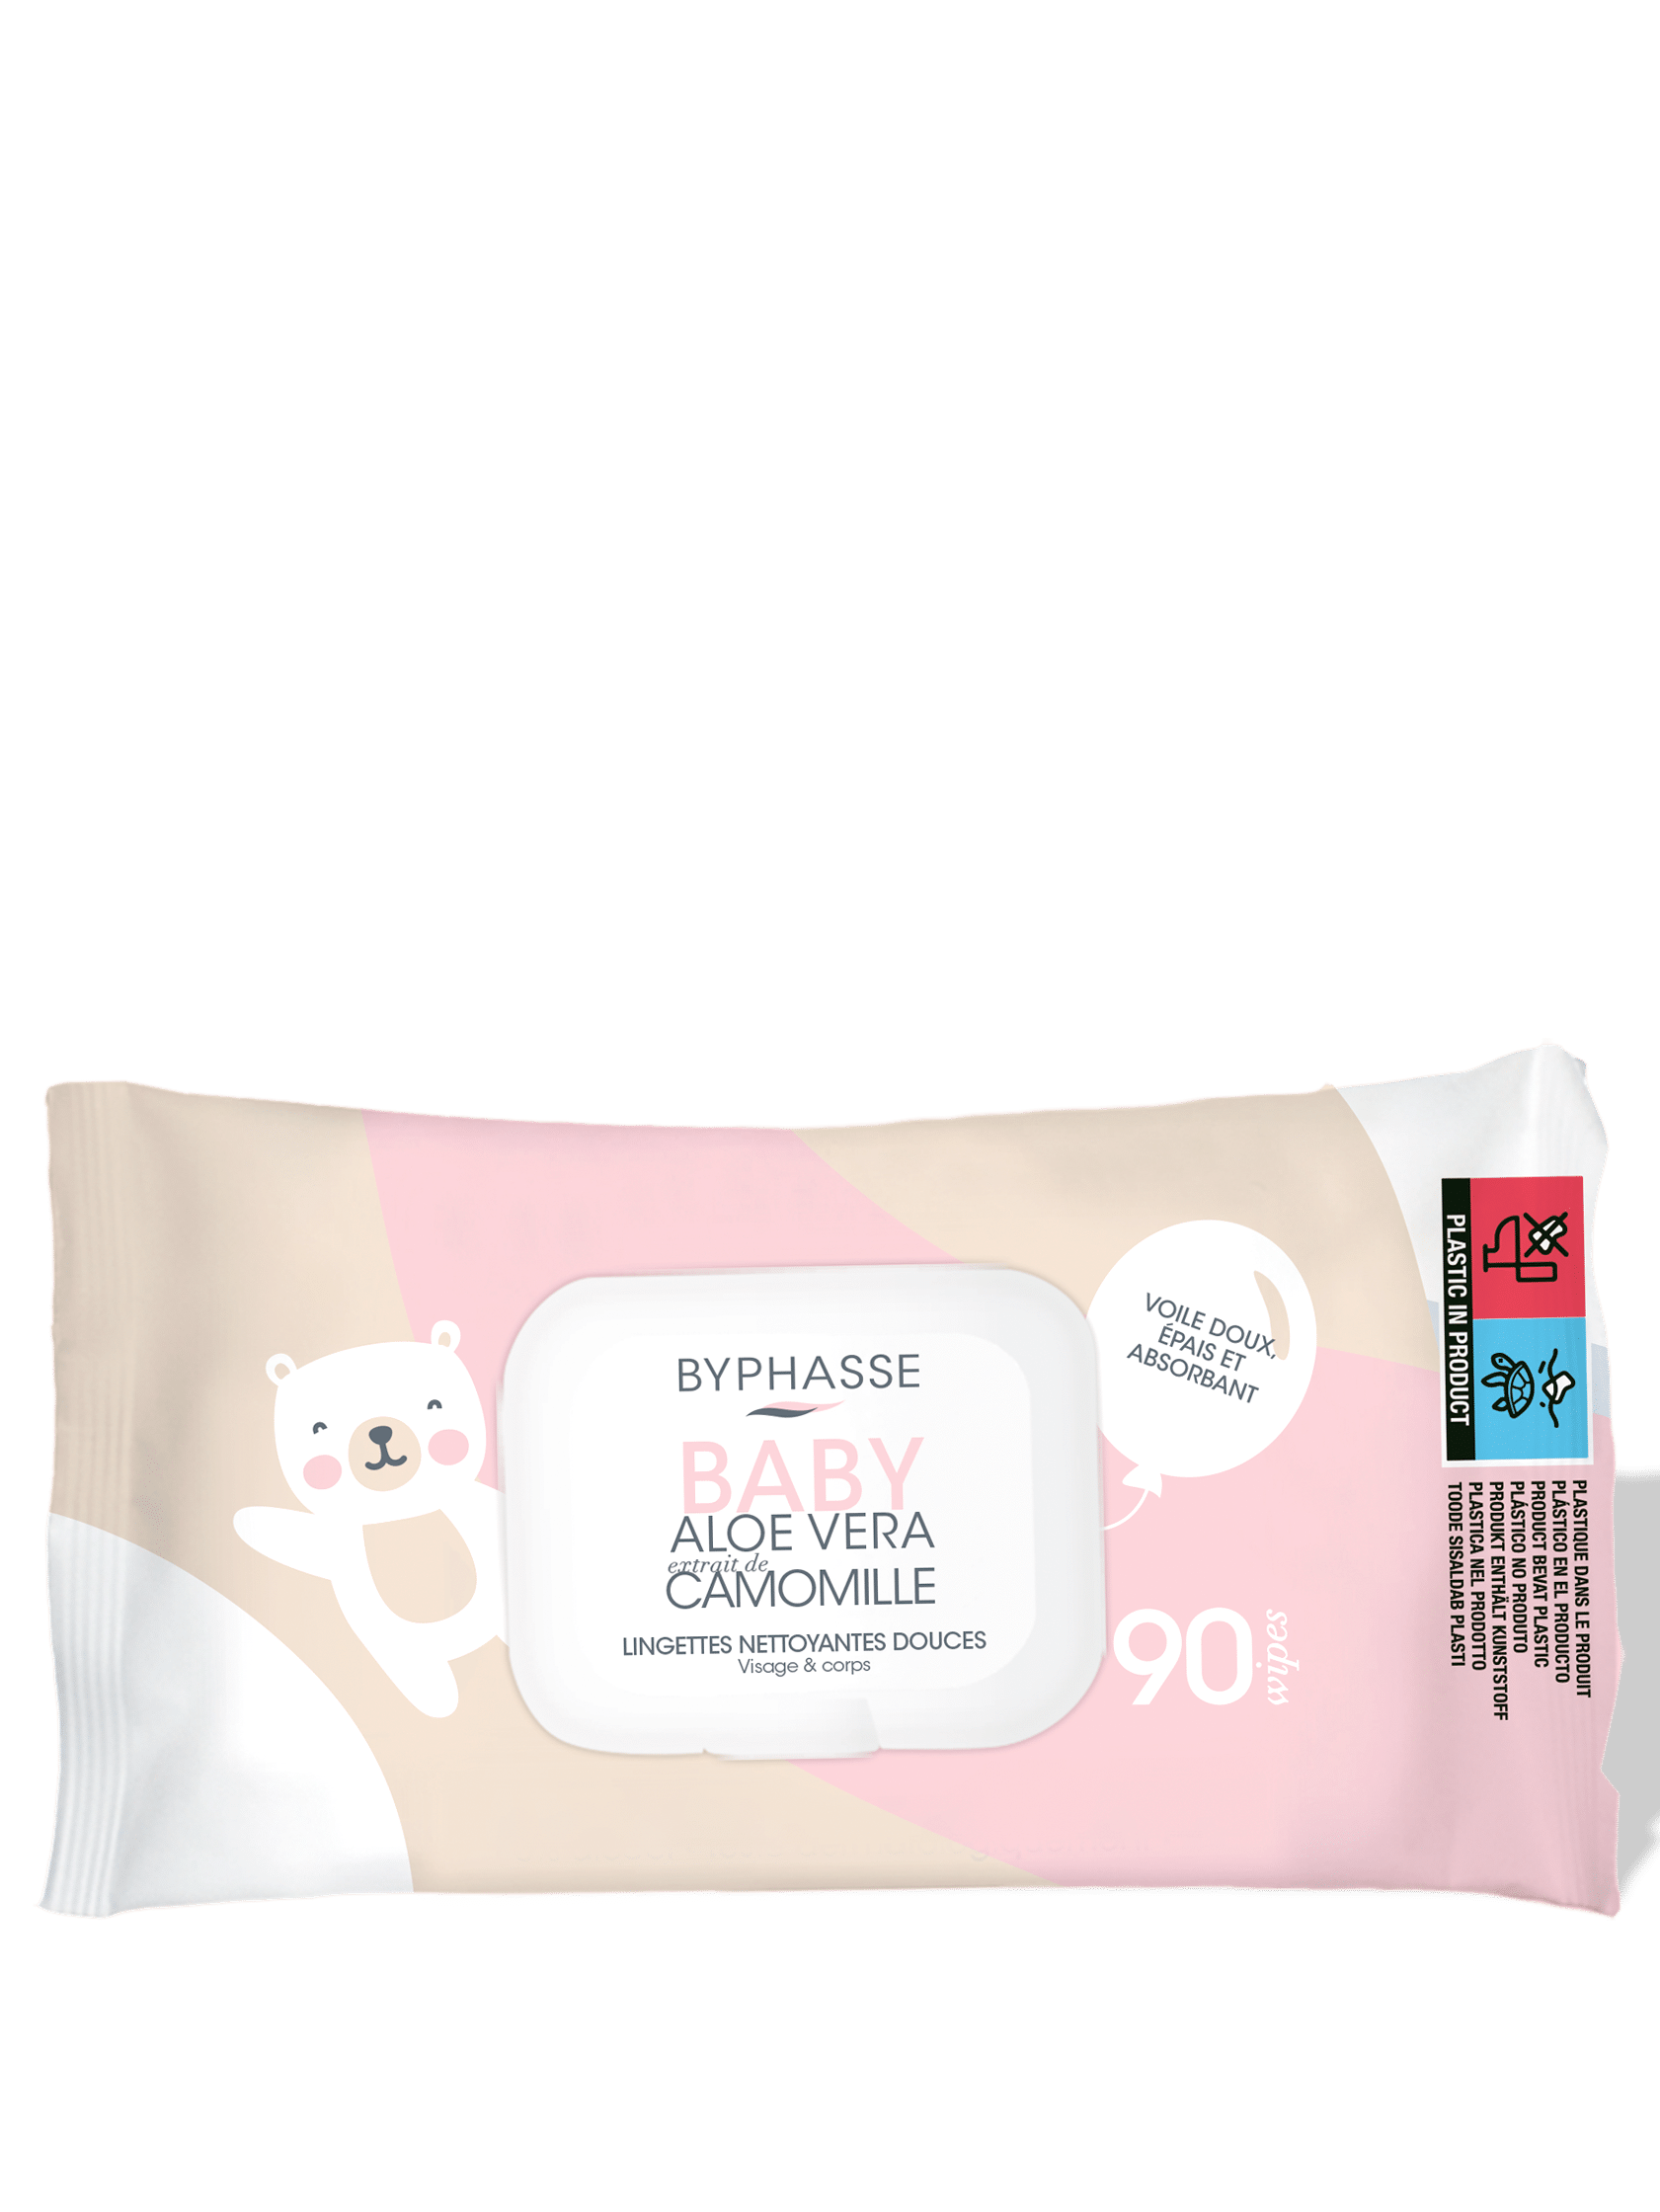 BABY CLEANSING WIPES 90 U. product_image